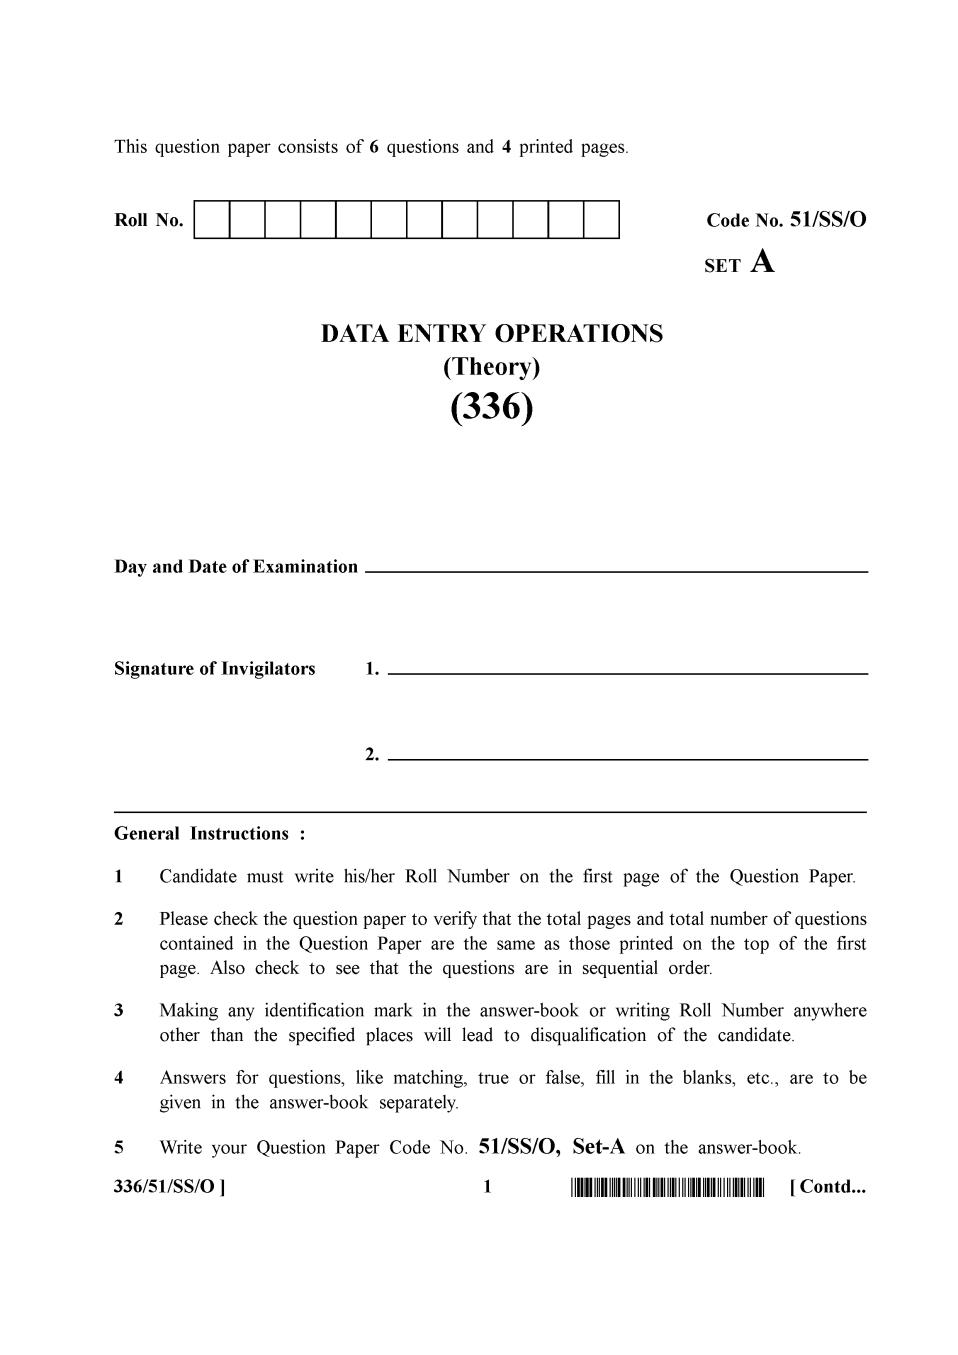 NIOS Class 12 Question Paper Oct 2015 - Data Entry Operations Theory - Page 1